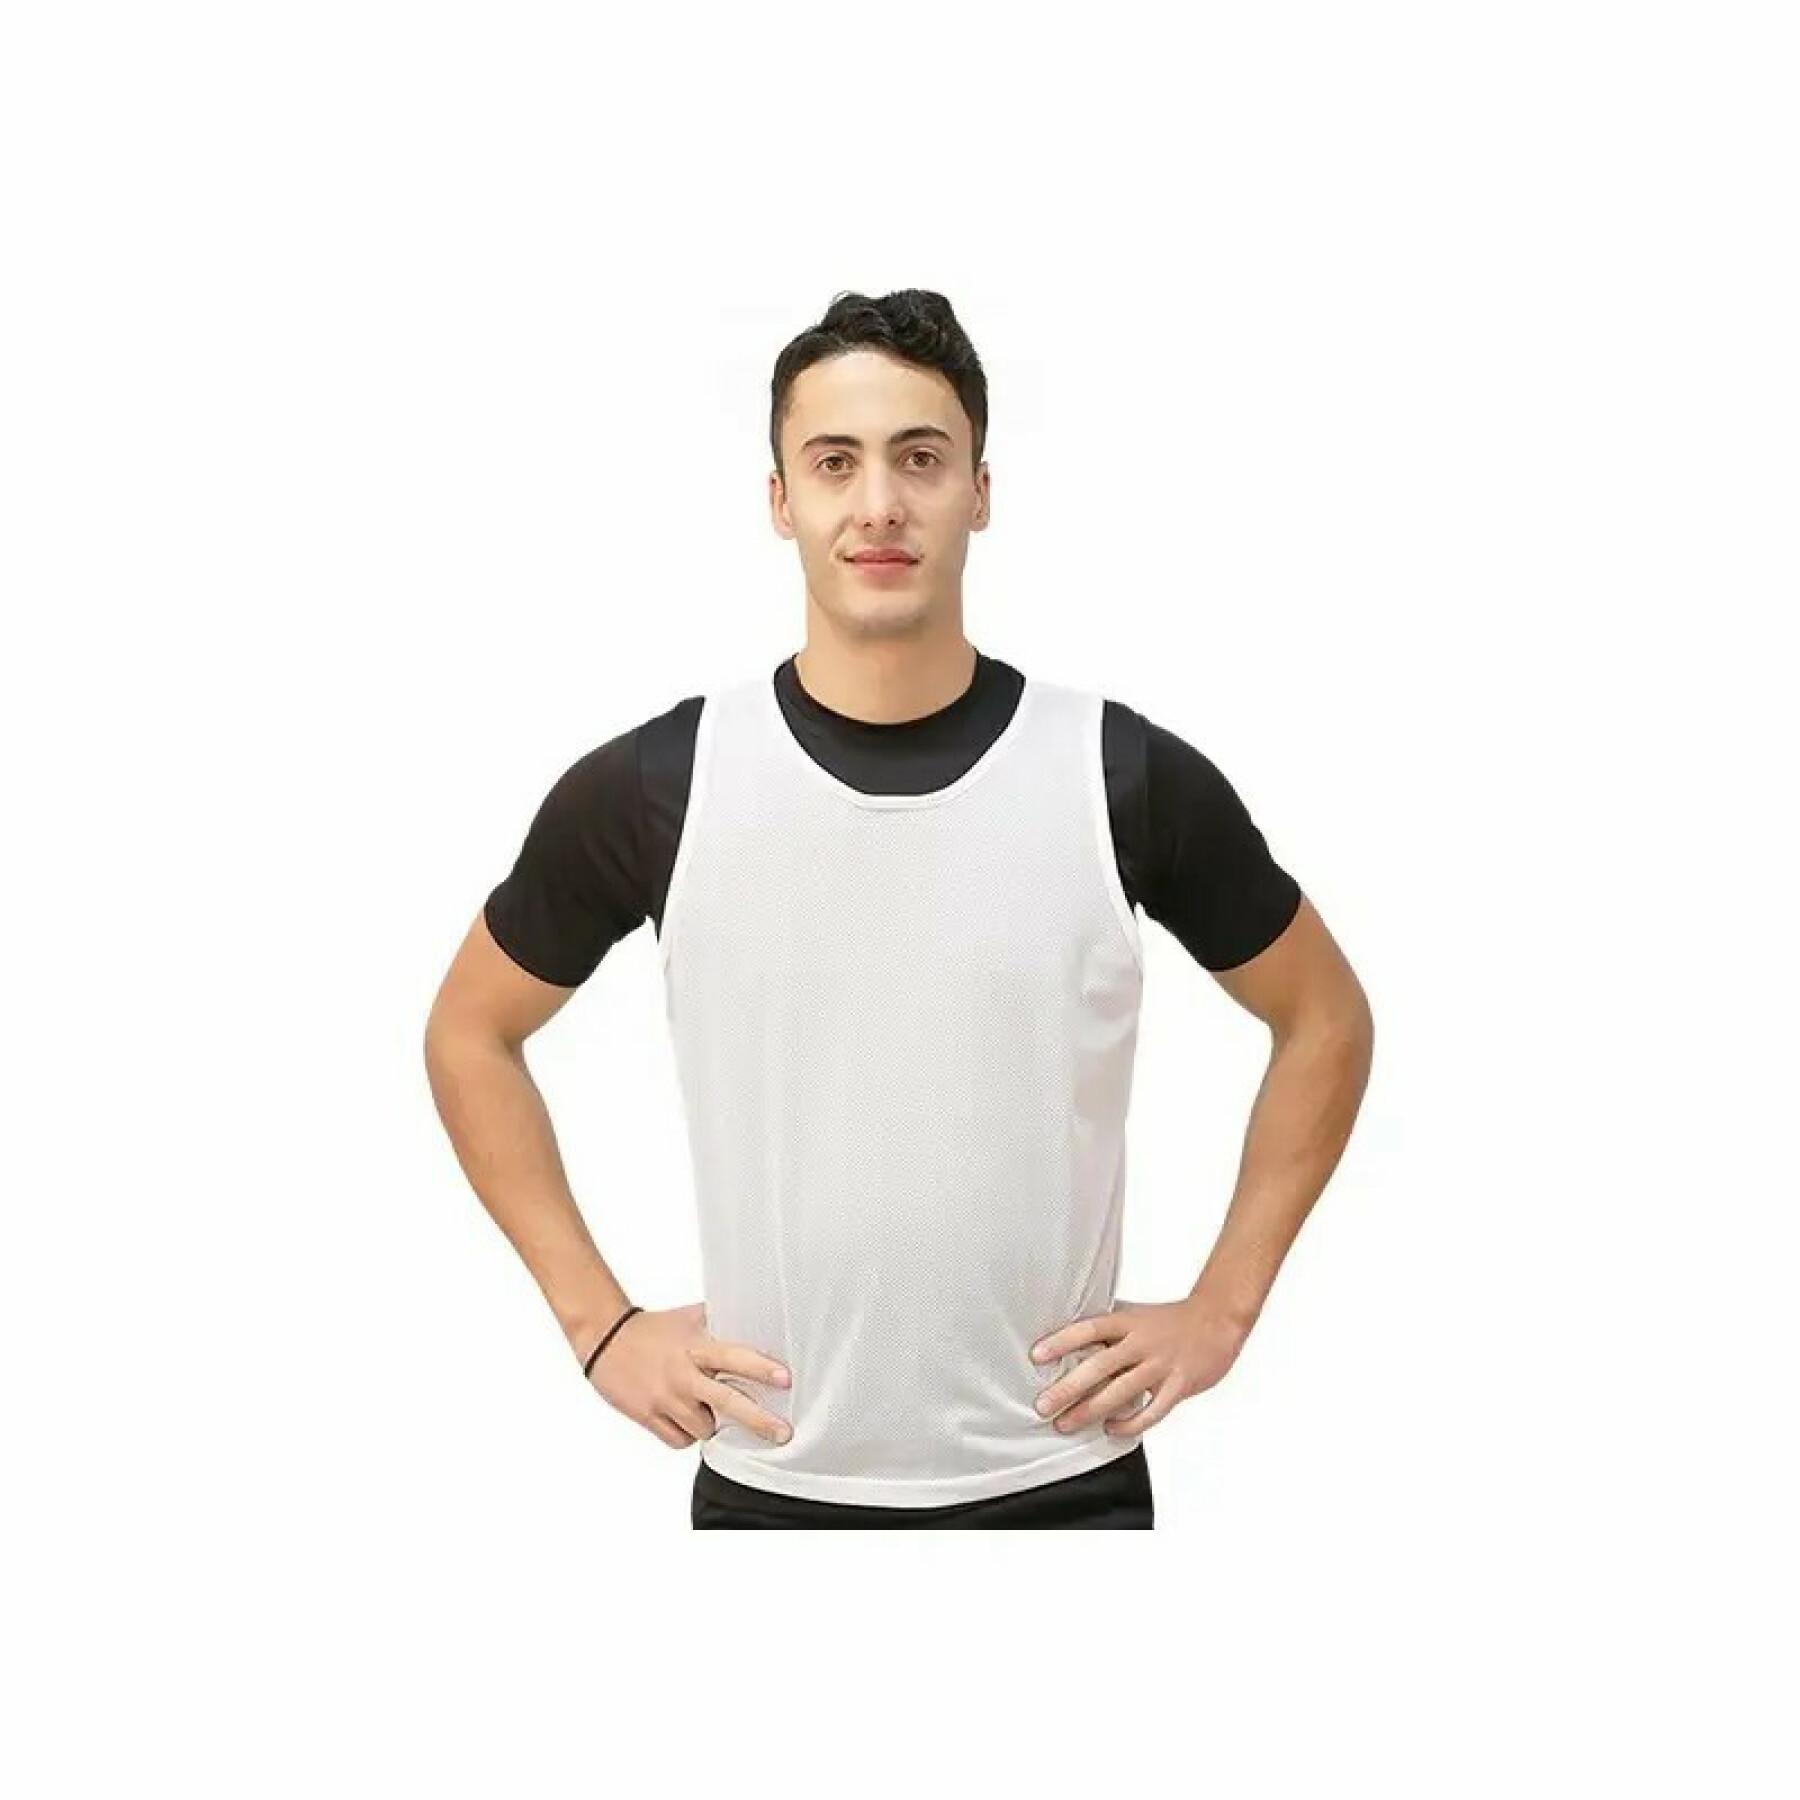 Training vest for young children Softee softee